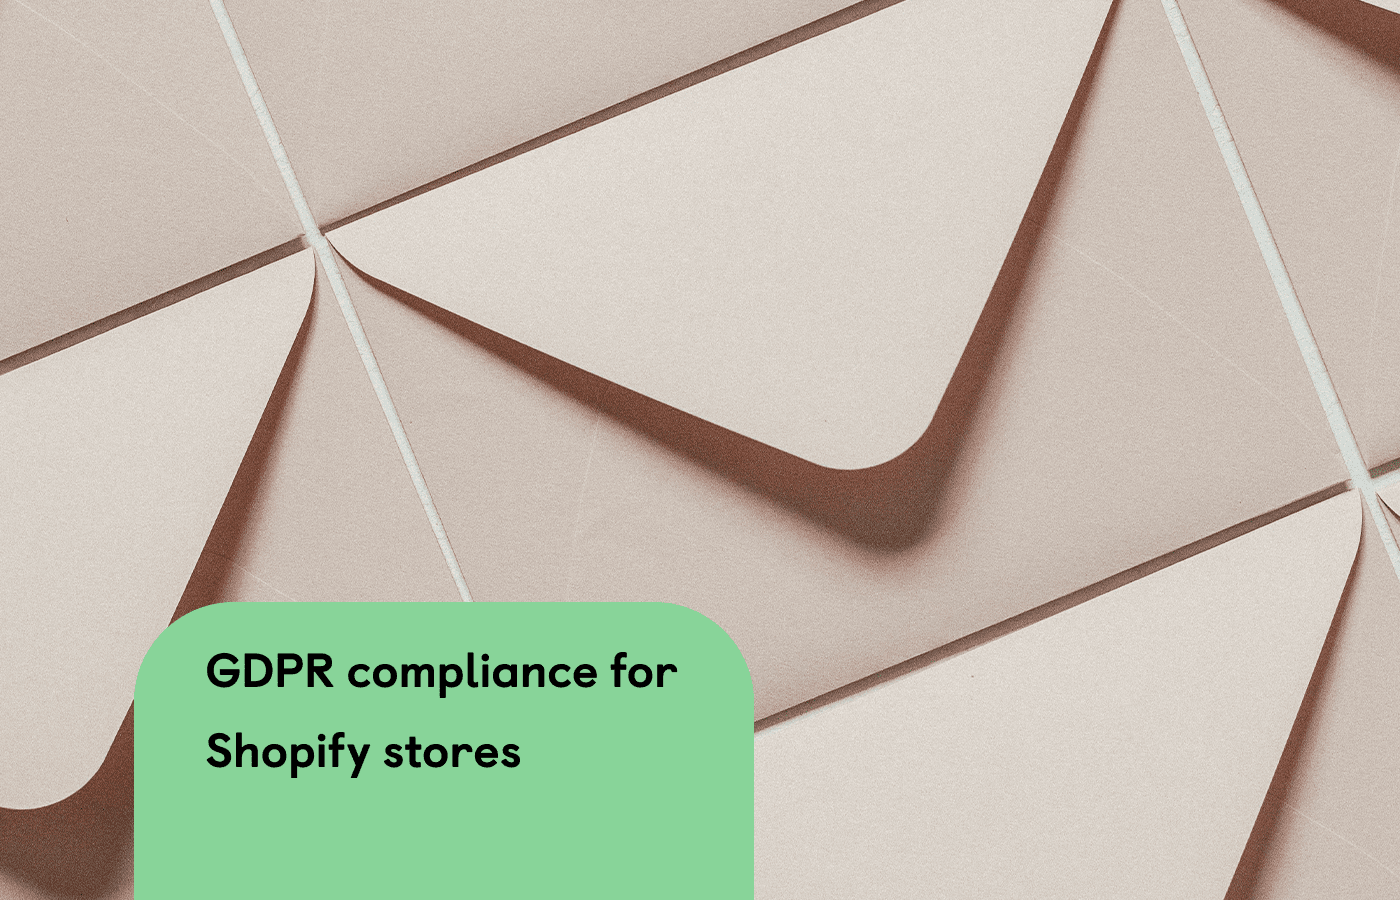 How does the GDPR affect your Shopify business?